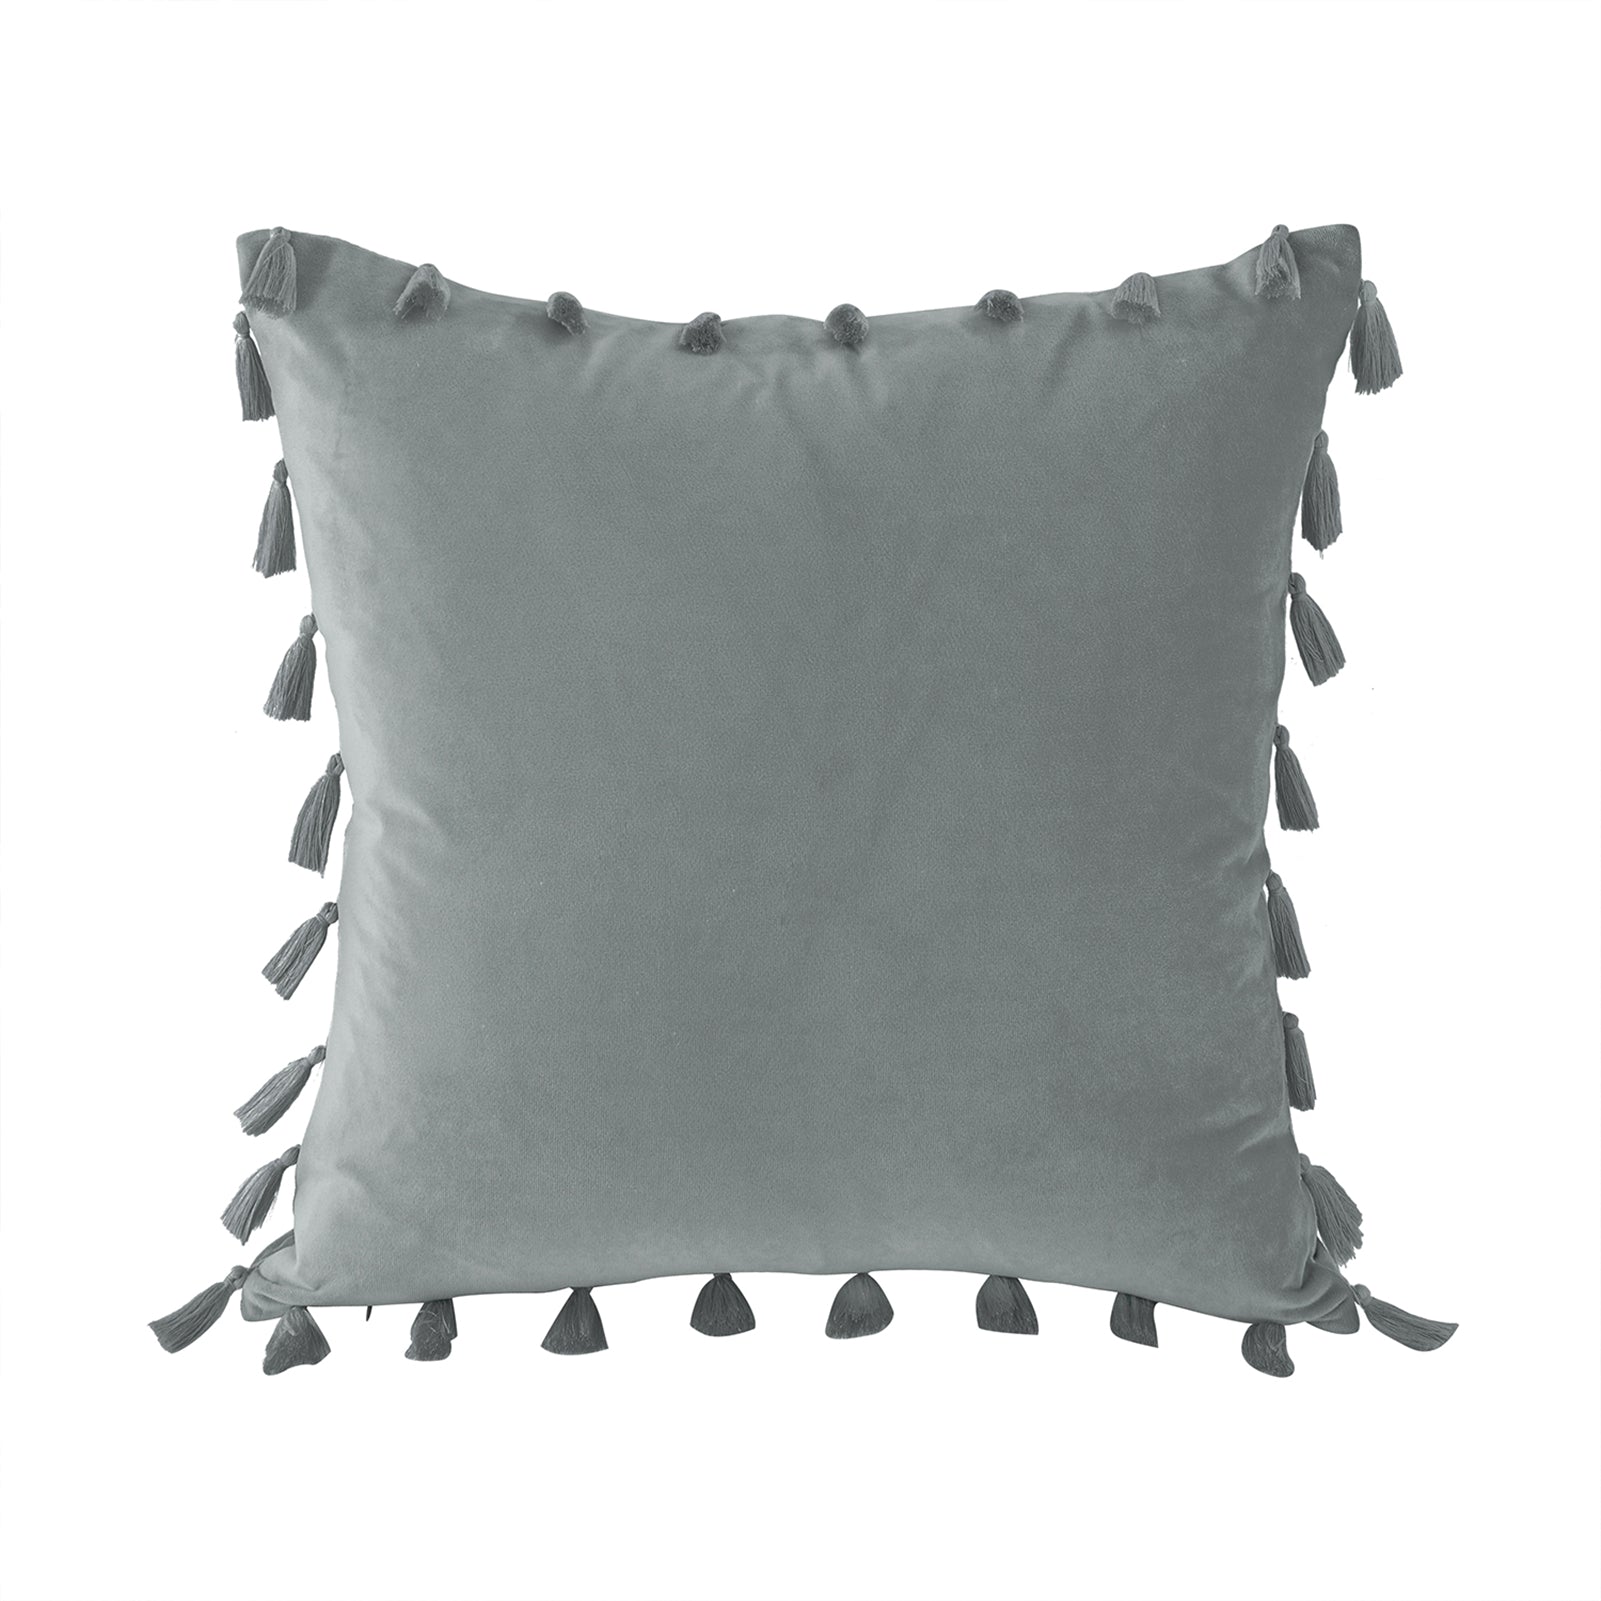 Boho Decorative Pillow Covers with Tassels